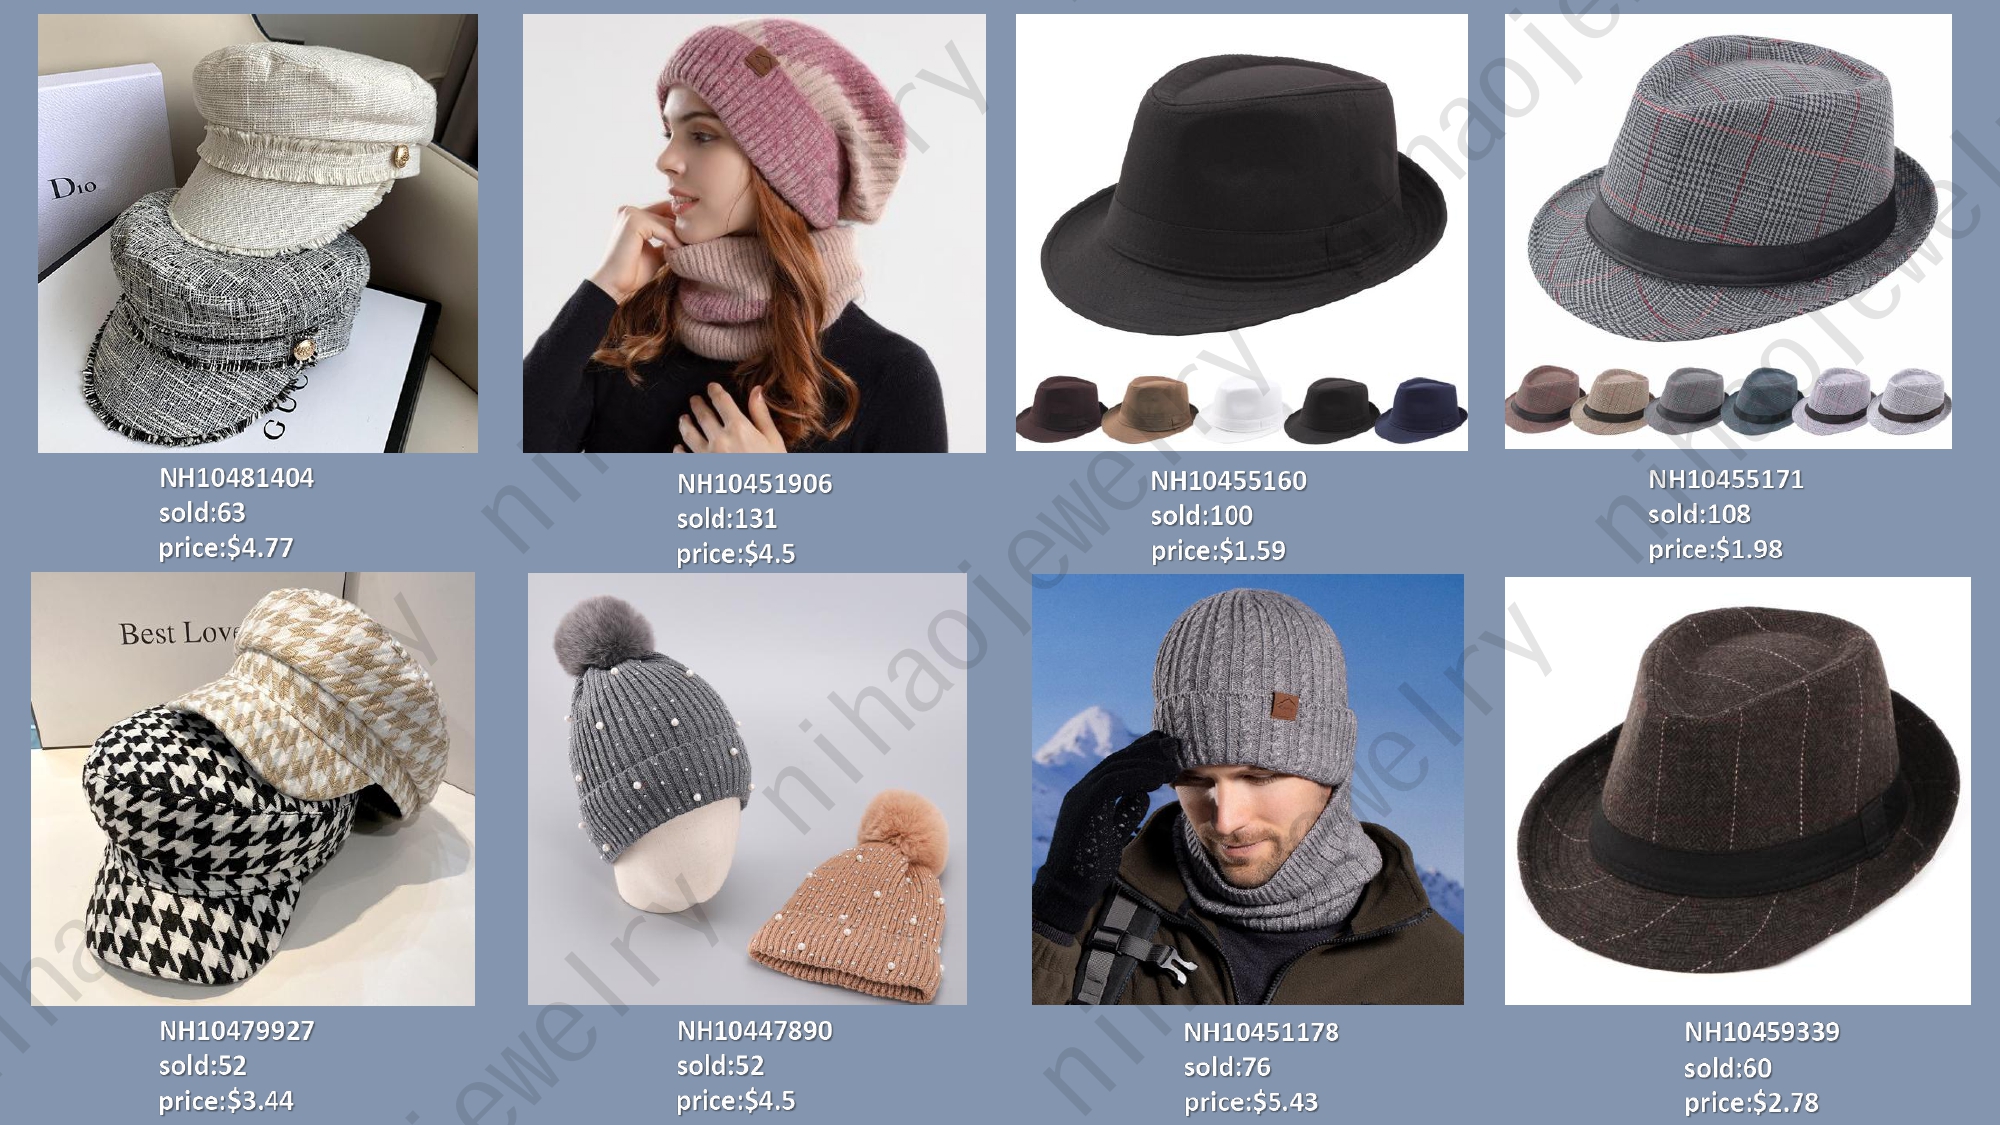 Hats are one of the must-have fashion accessories for ladies.